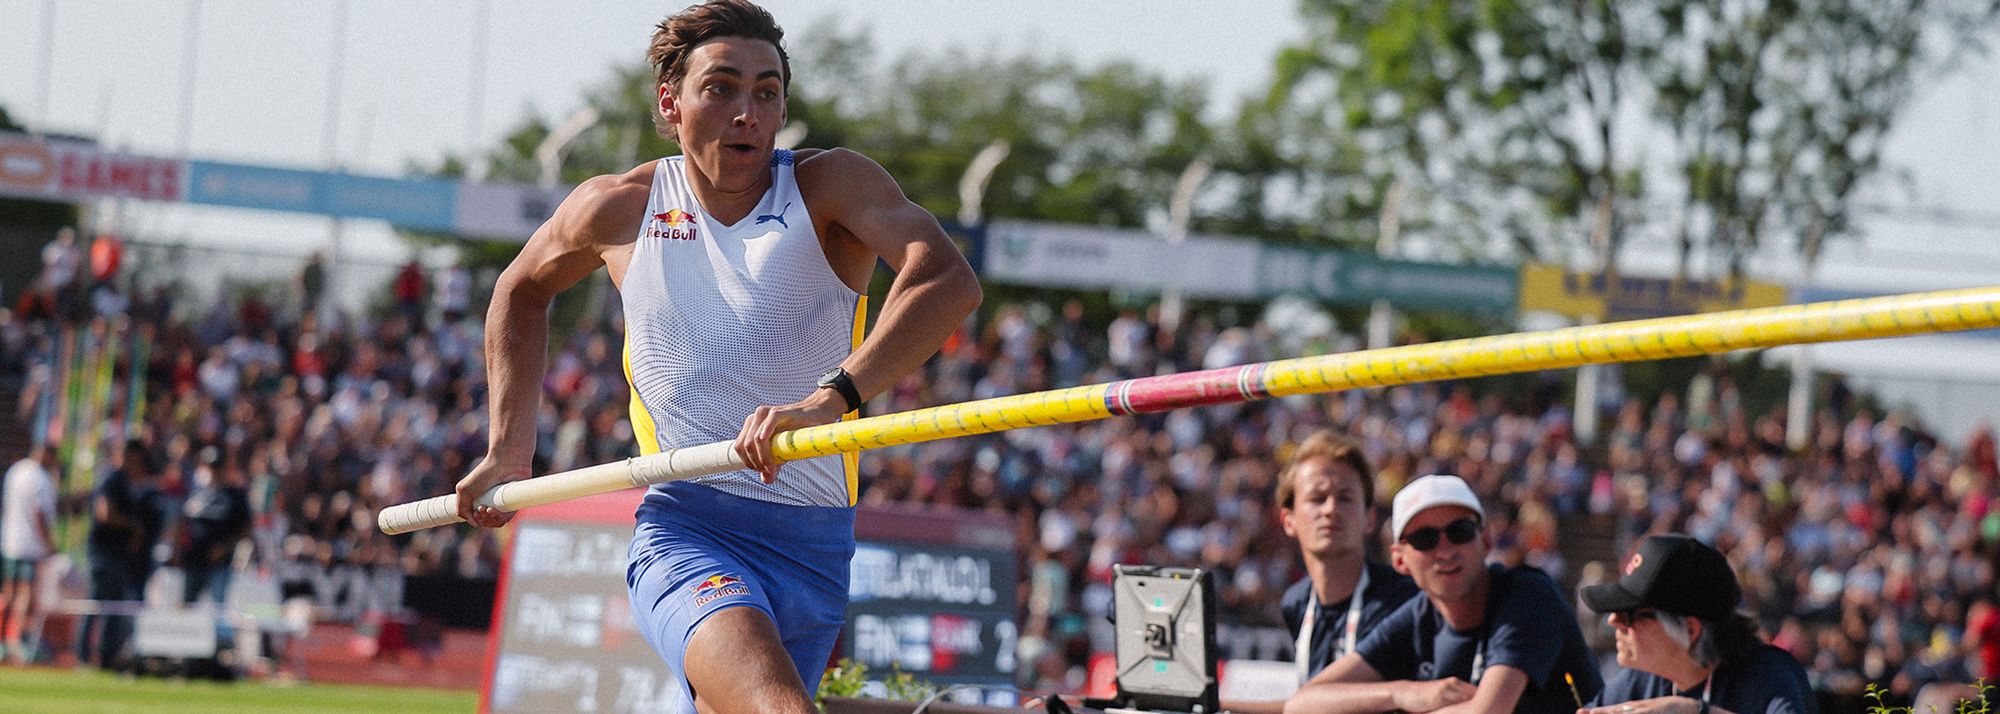 With a jump as precise as it was perfect, as powerful as it was peerless, Mondo Duplantis did what he does best at the FBK Games